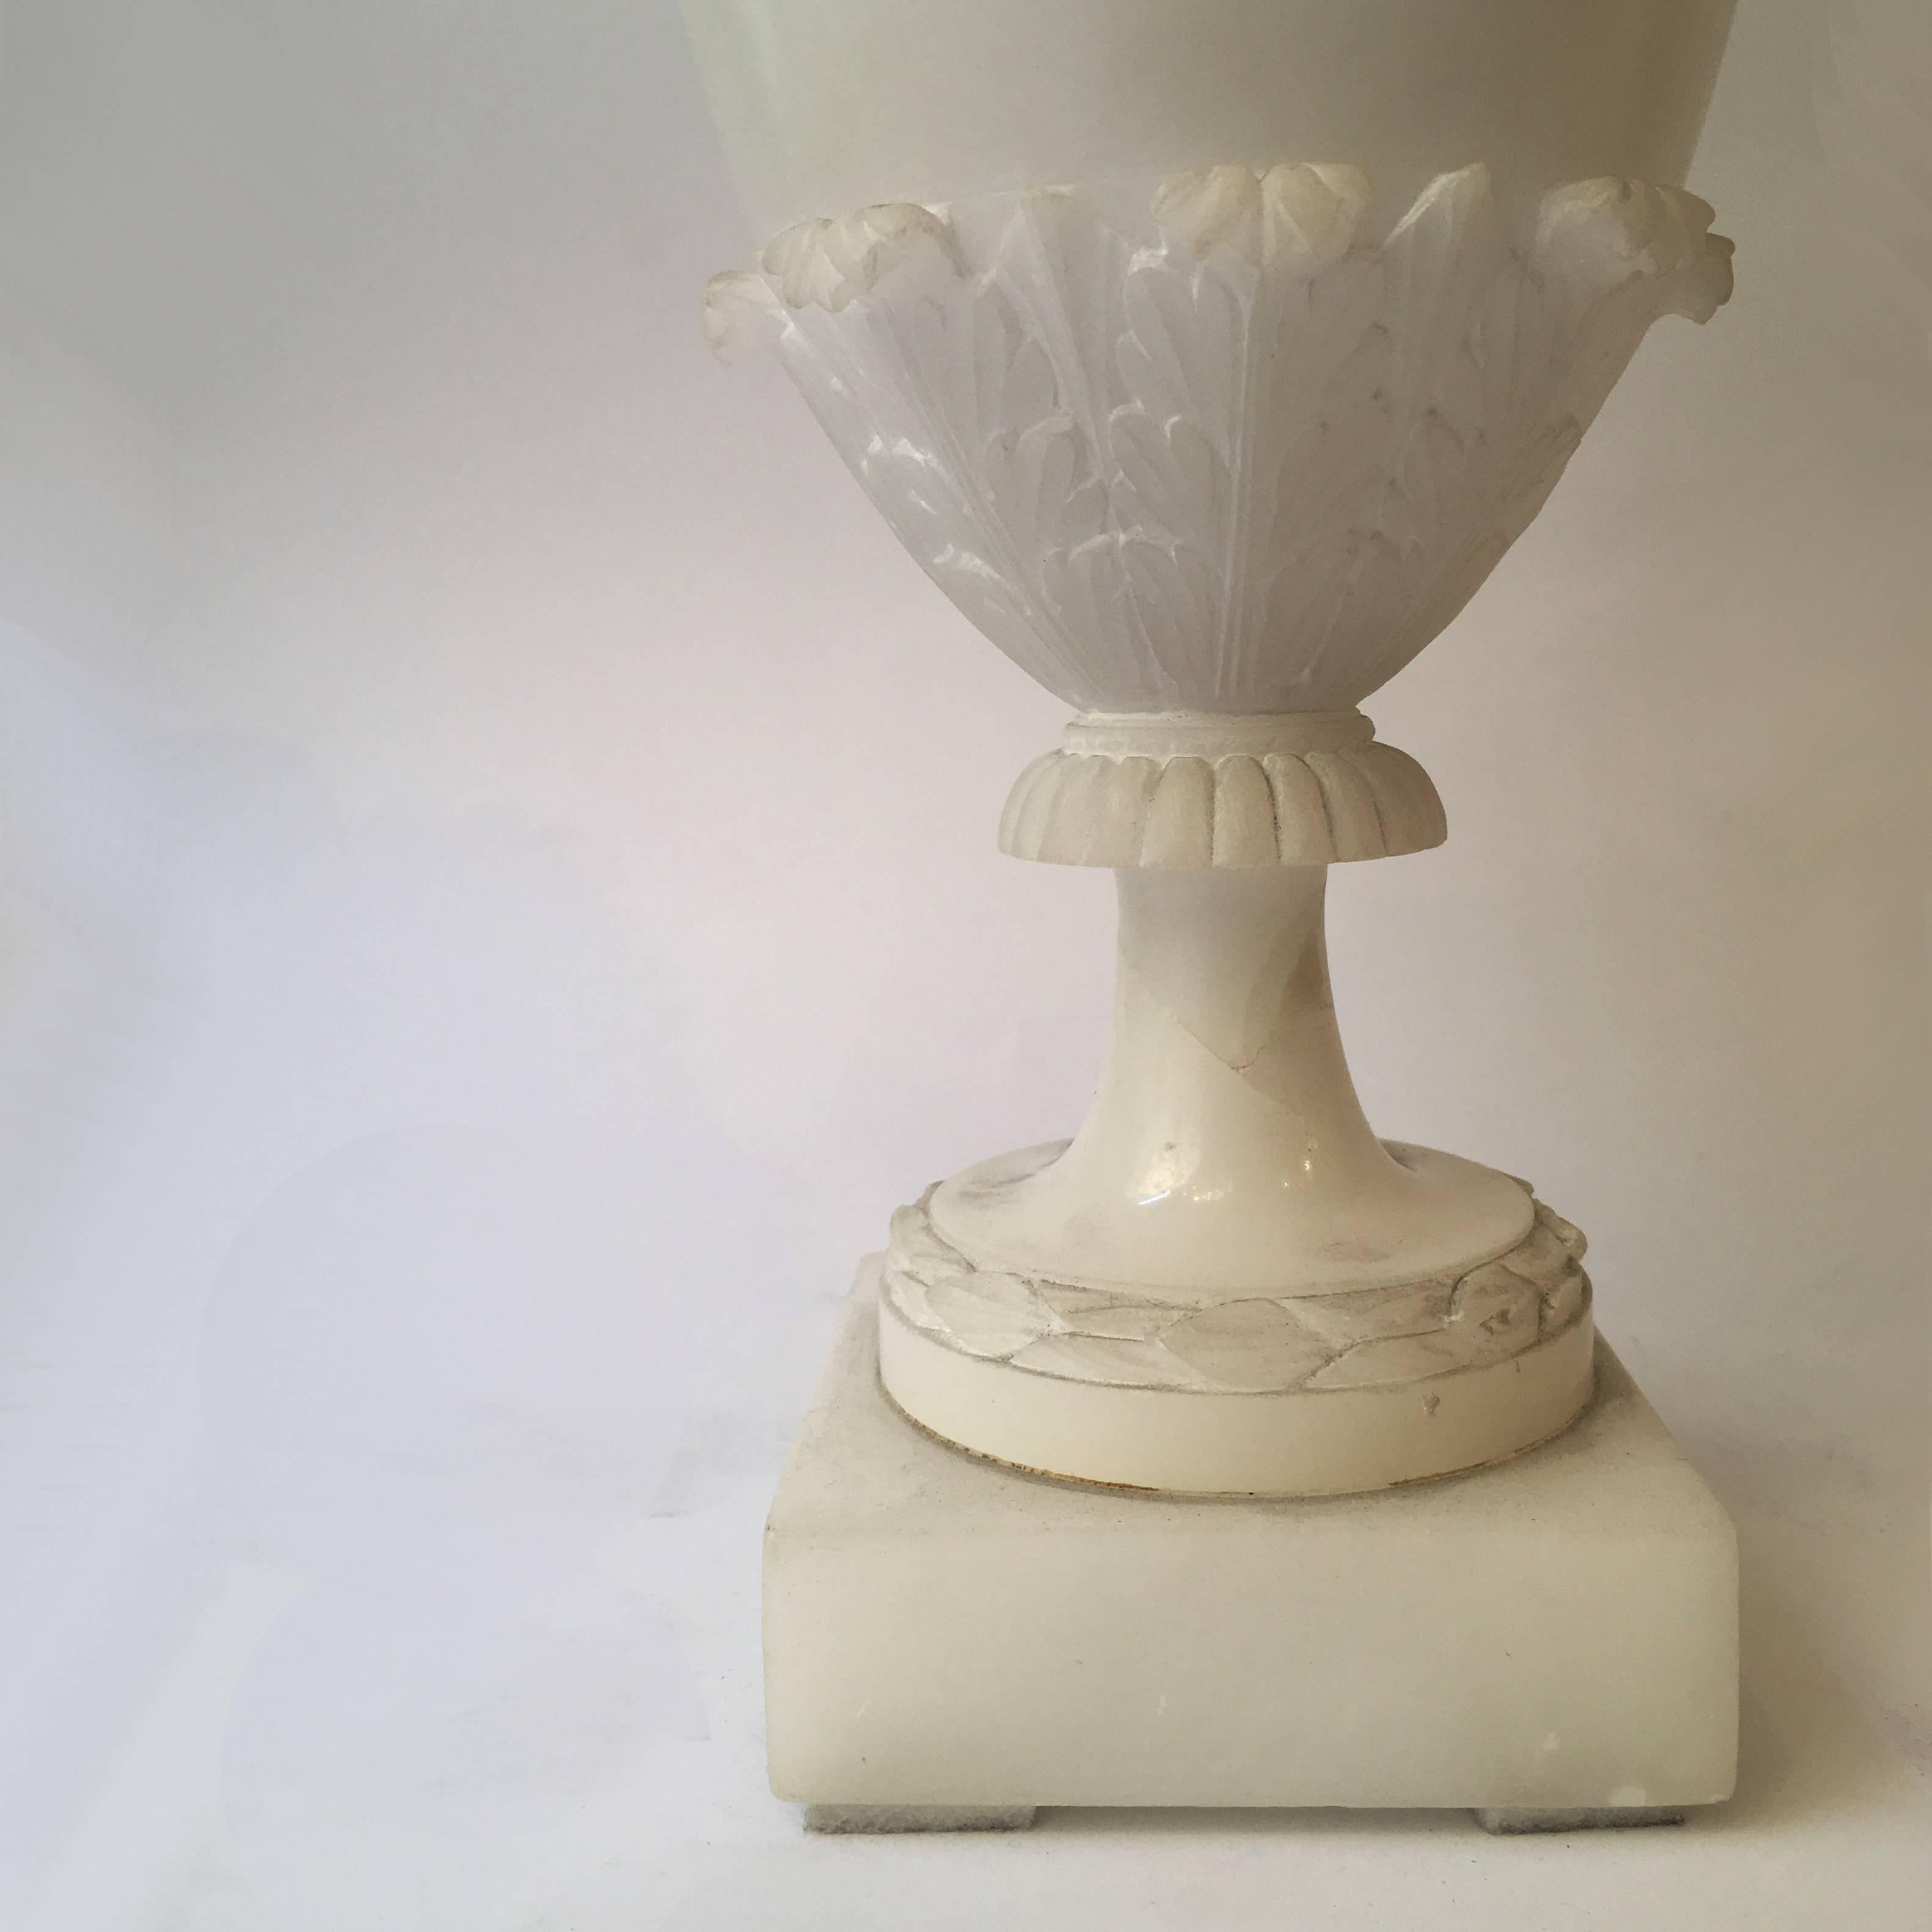 19th Century Italian Pair of Hand-Carved Neoclassical Alabaster Vases or Urns In Good Condition For Sale In Firenze, IT